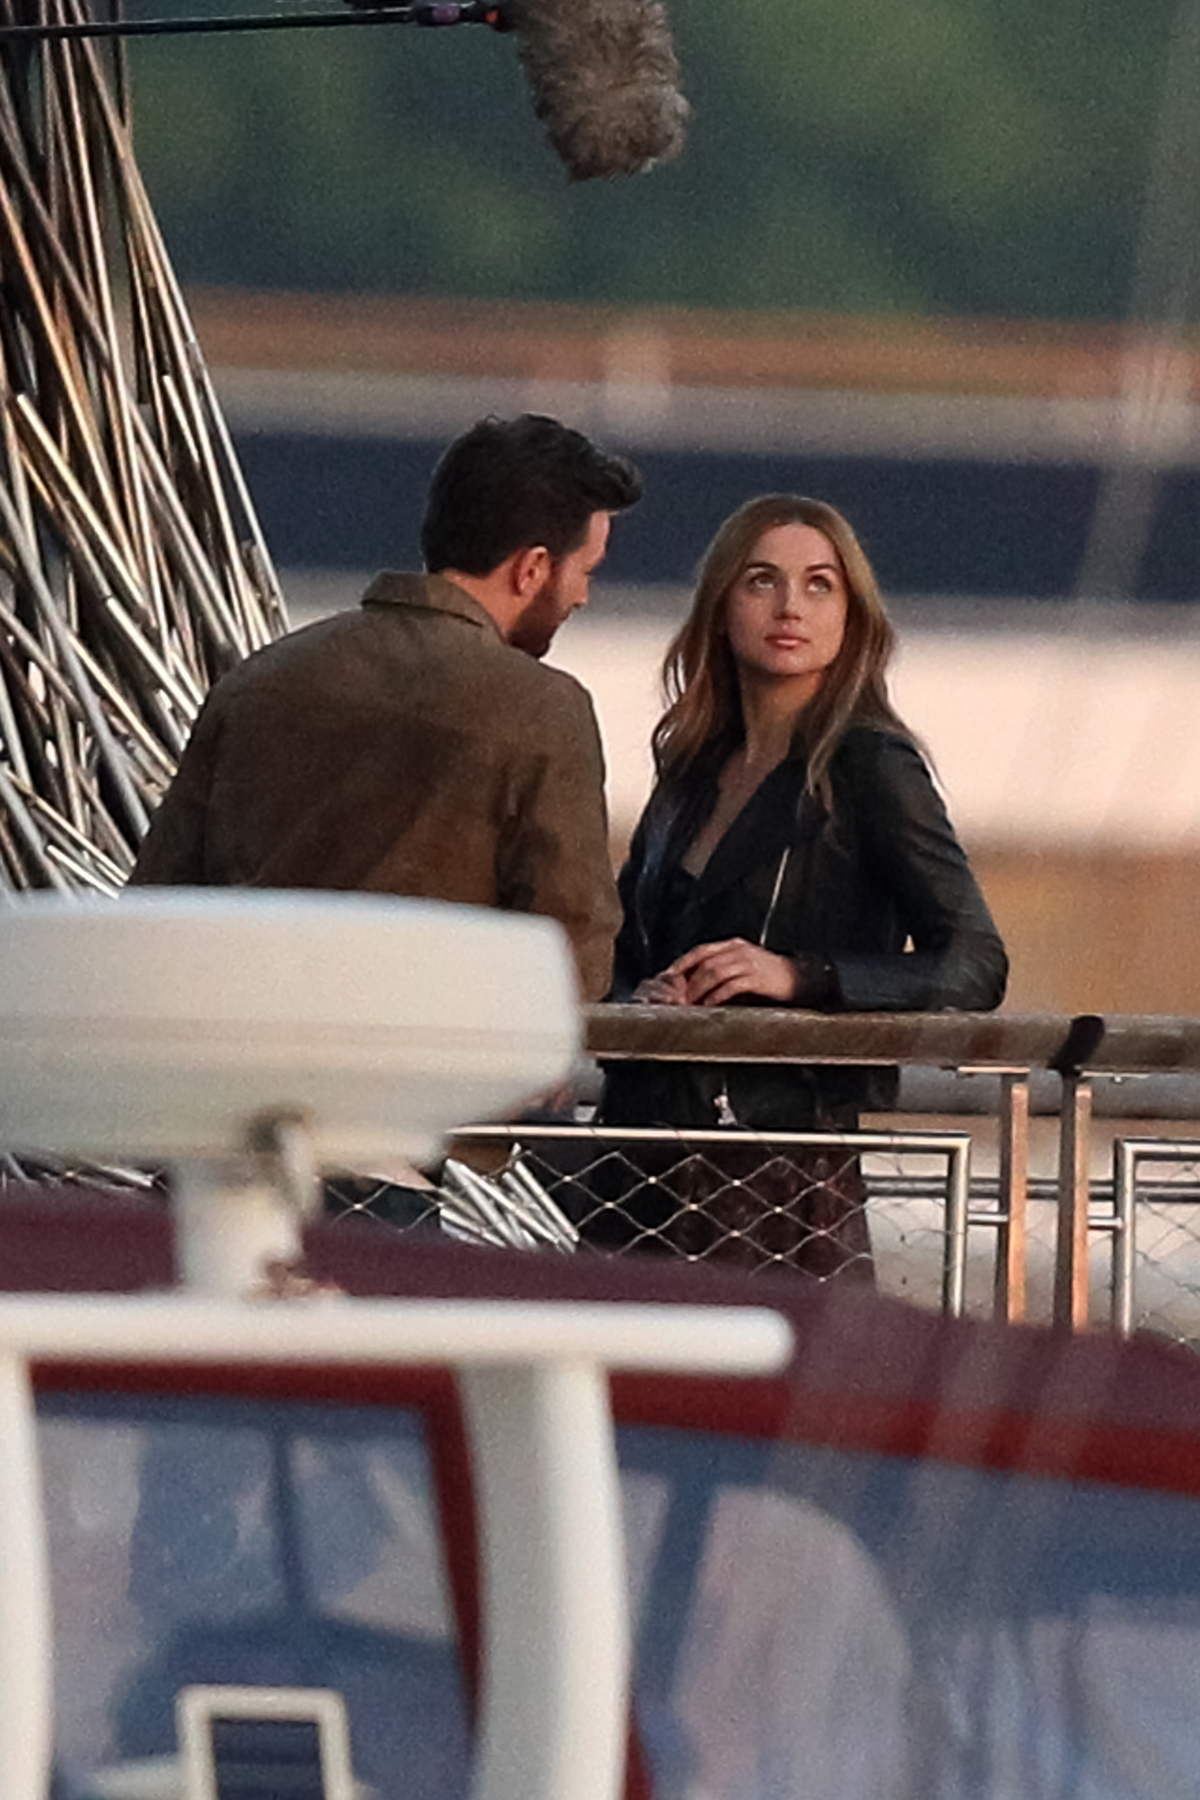 Ghosted featuring Ana de Armas and Chris Evans Released: What Do Critics  Say? - Ci-Lovers